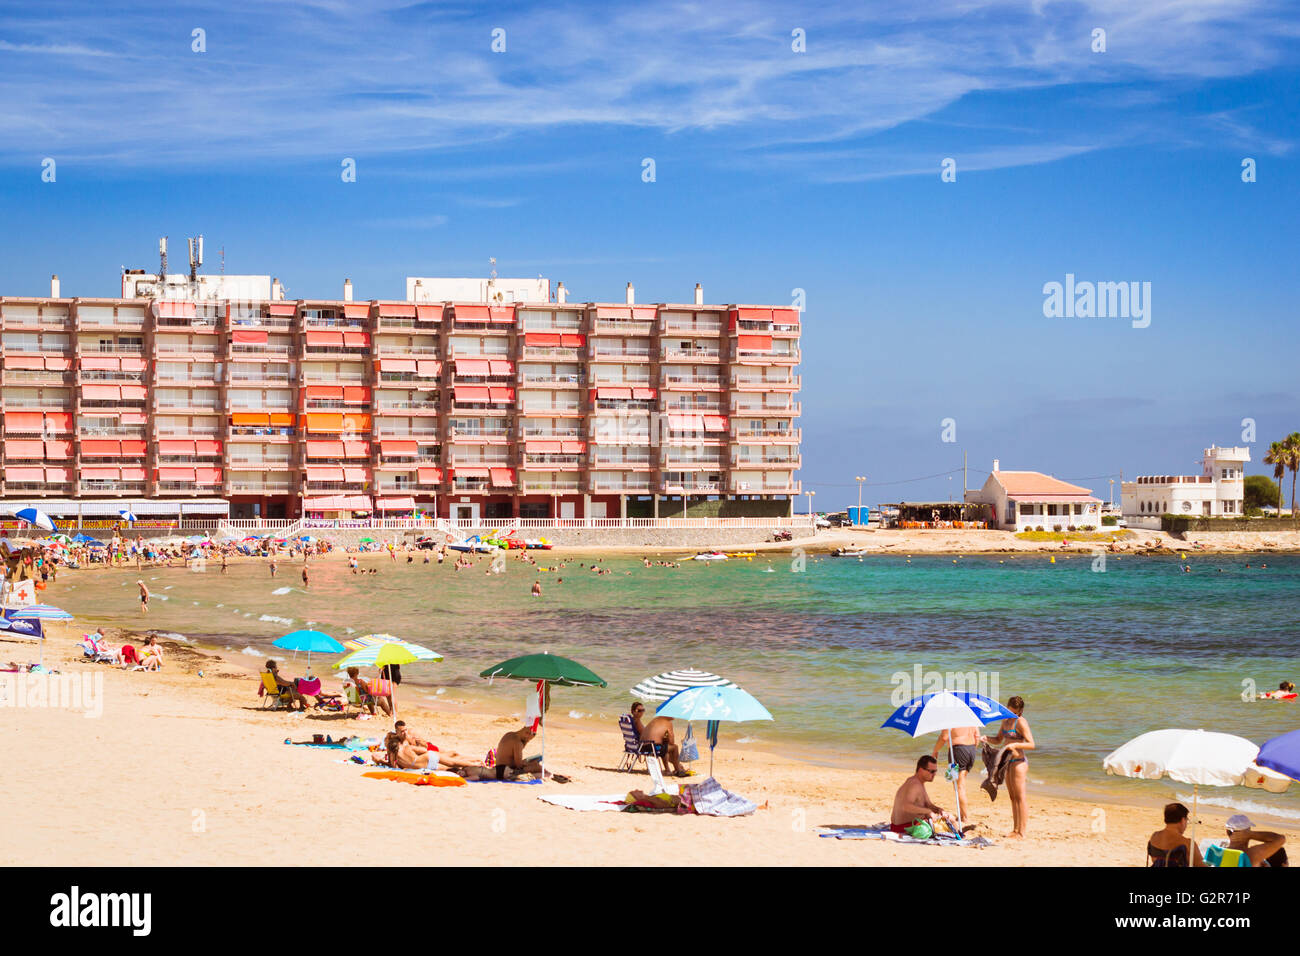 TORREVIEJA, SPAIN - SEPTEMBER 13, 2014: Sunny Mediterranean beach, Tourists relax on sand on loungers under parasols. Torrevieja Stock Photo